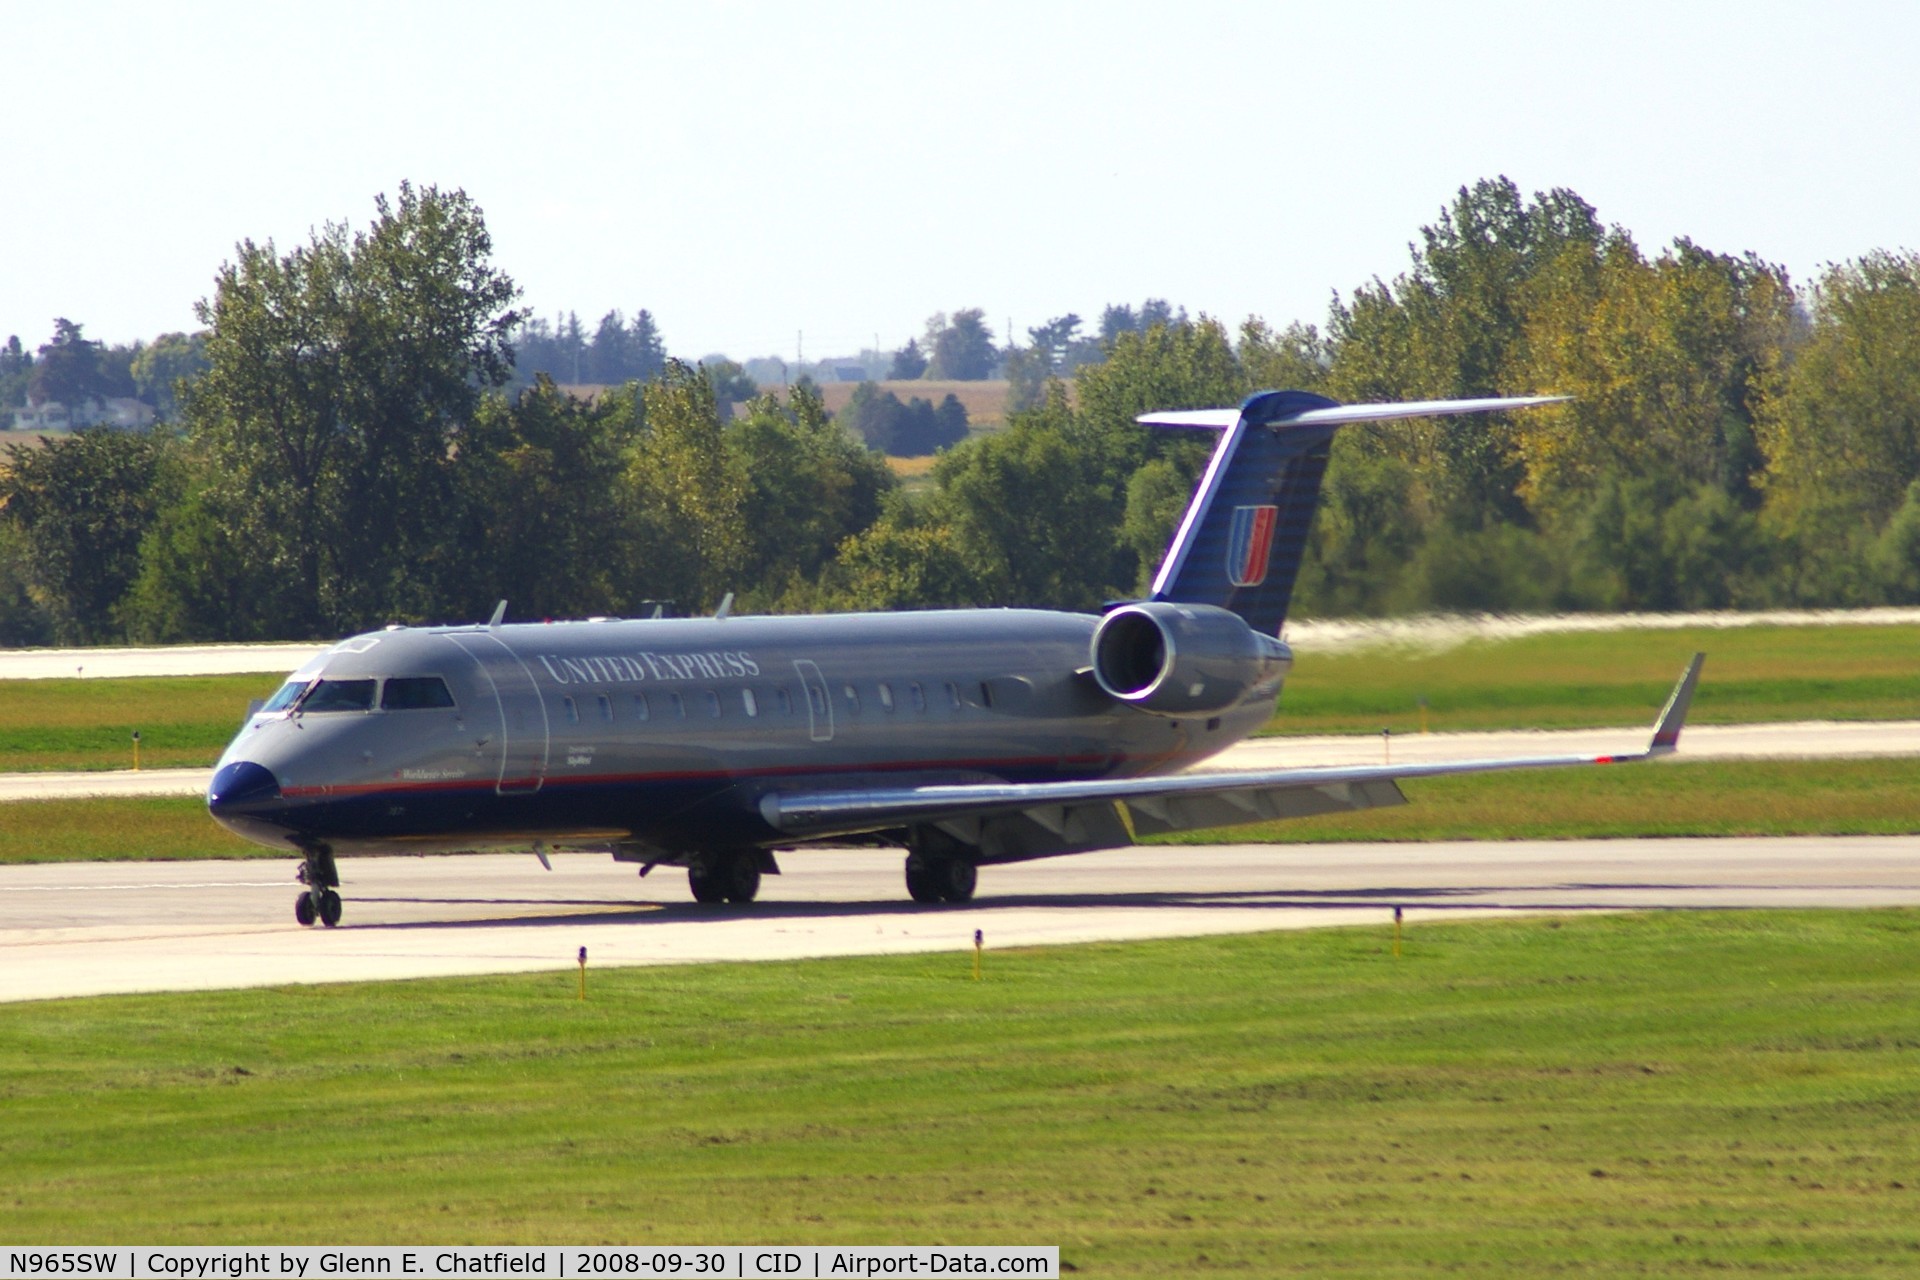 N965SW, 2003 Bombardier CRJ-200ER (CL-600-2B19) C/N 7871, Turning on to Bravo after back-taxiing on Runway 31 after landing